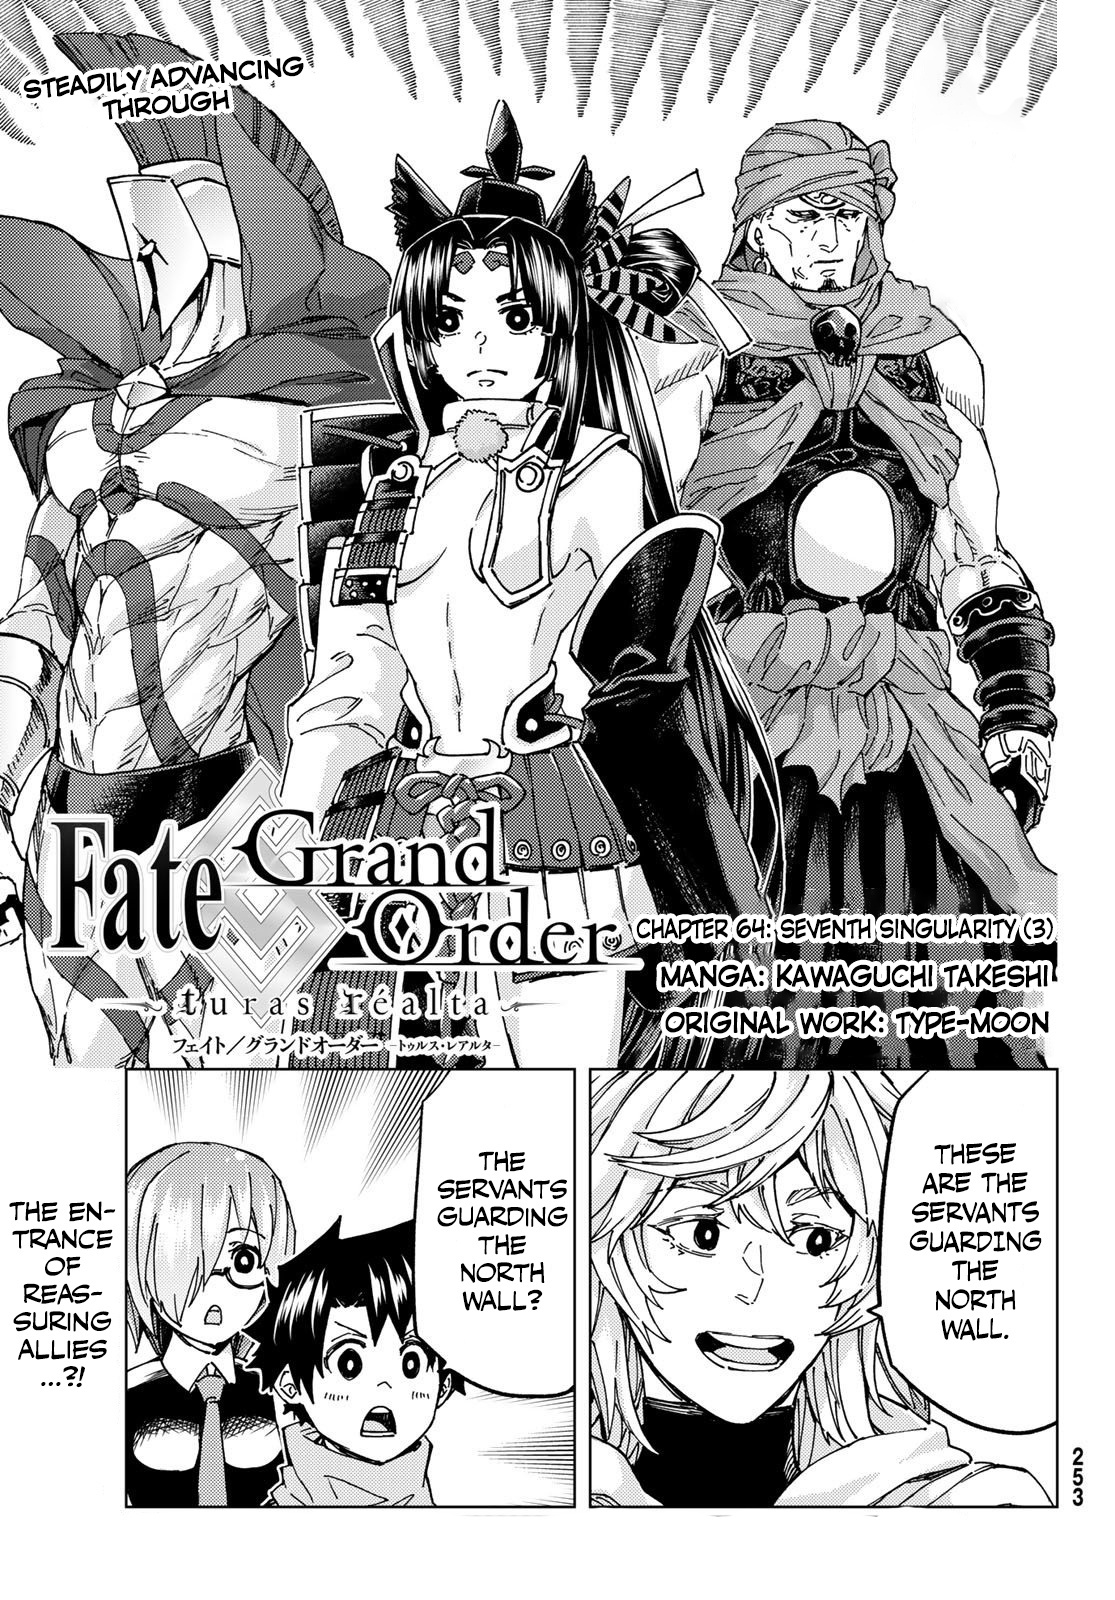 Fate/grand Order -Turas Réalta- Chapter 64: Seventh Singularity 3 - Picture 1